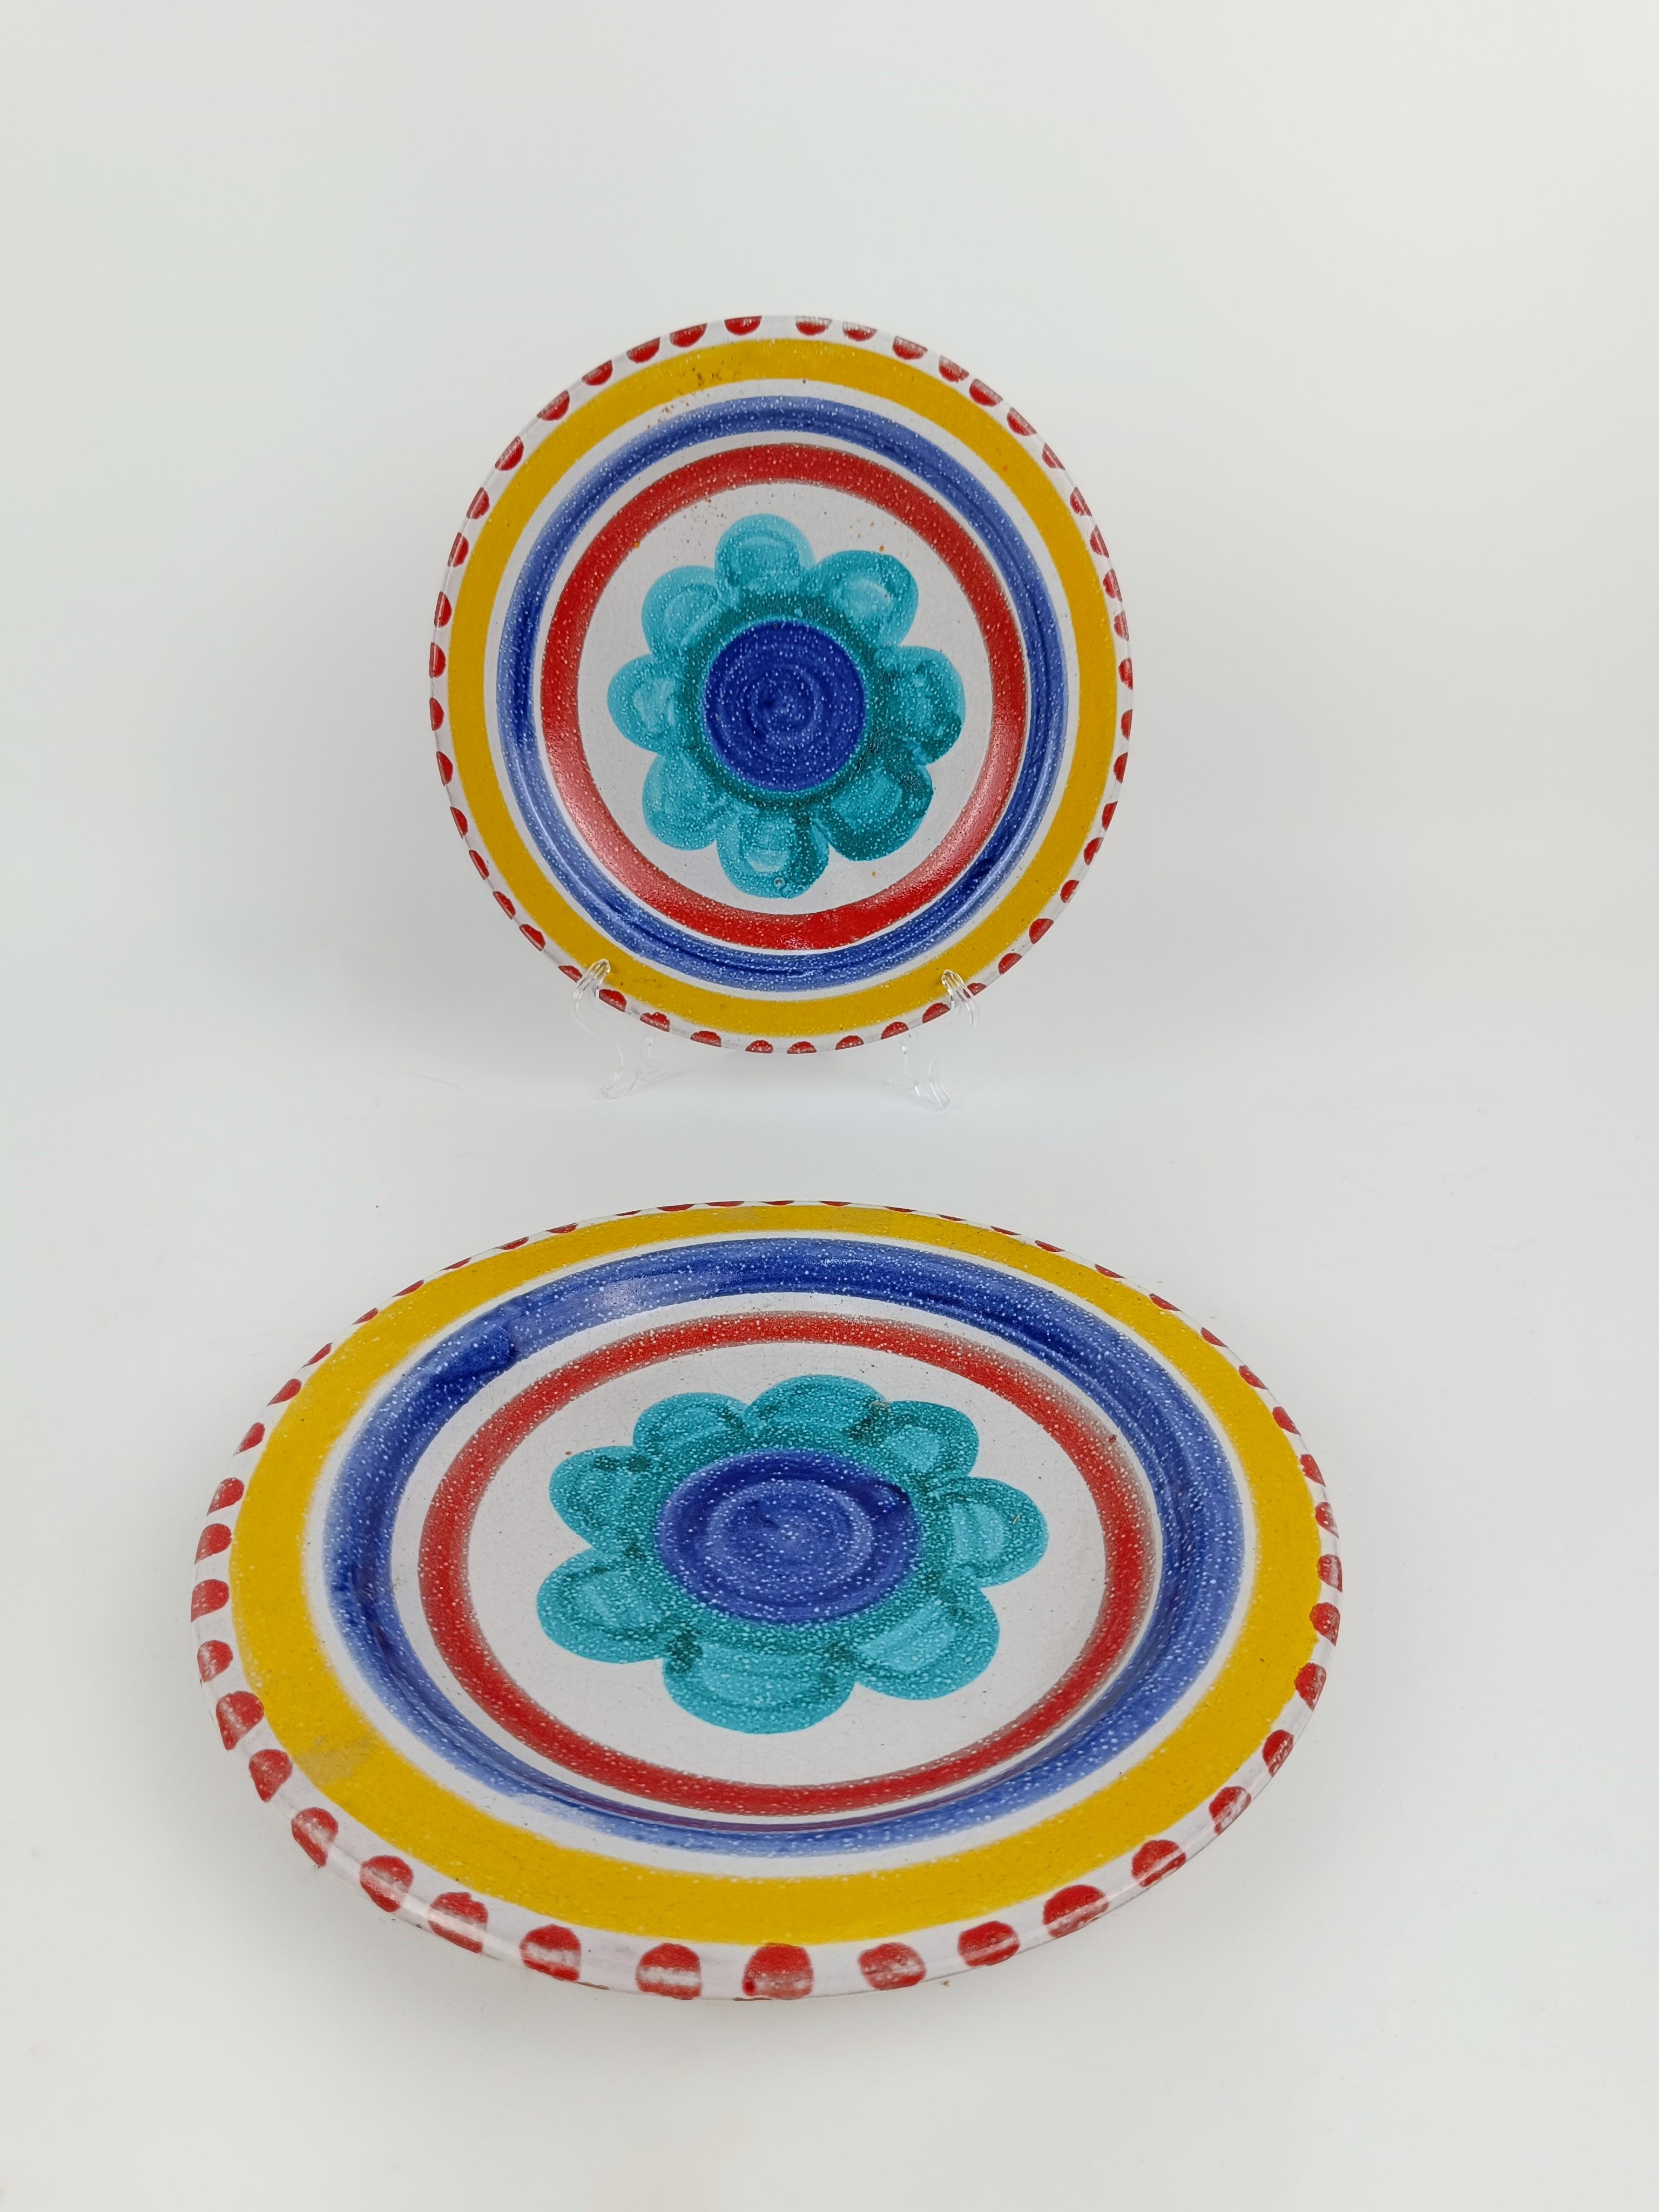 Decorative Hand Painted Italian Ceramic Plates by DeSimone, Palermo 1960s  For Sale 5